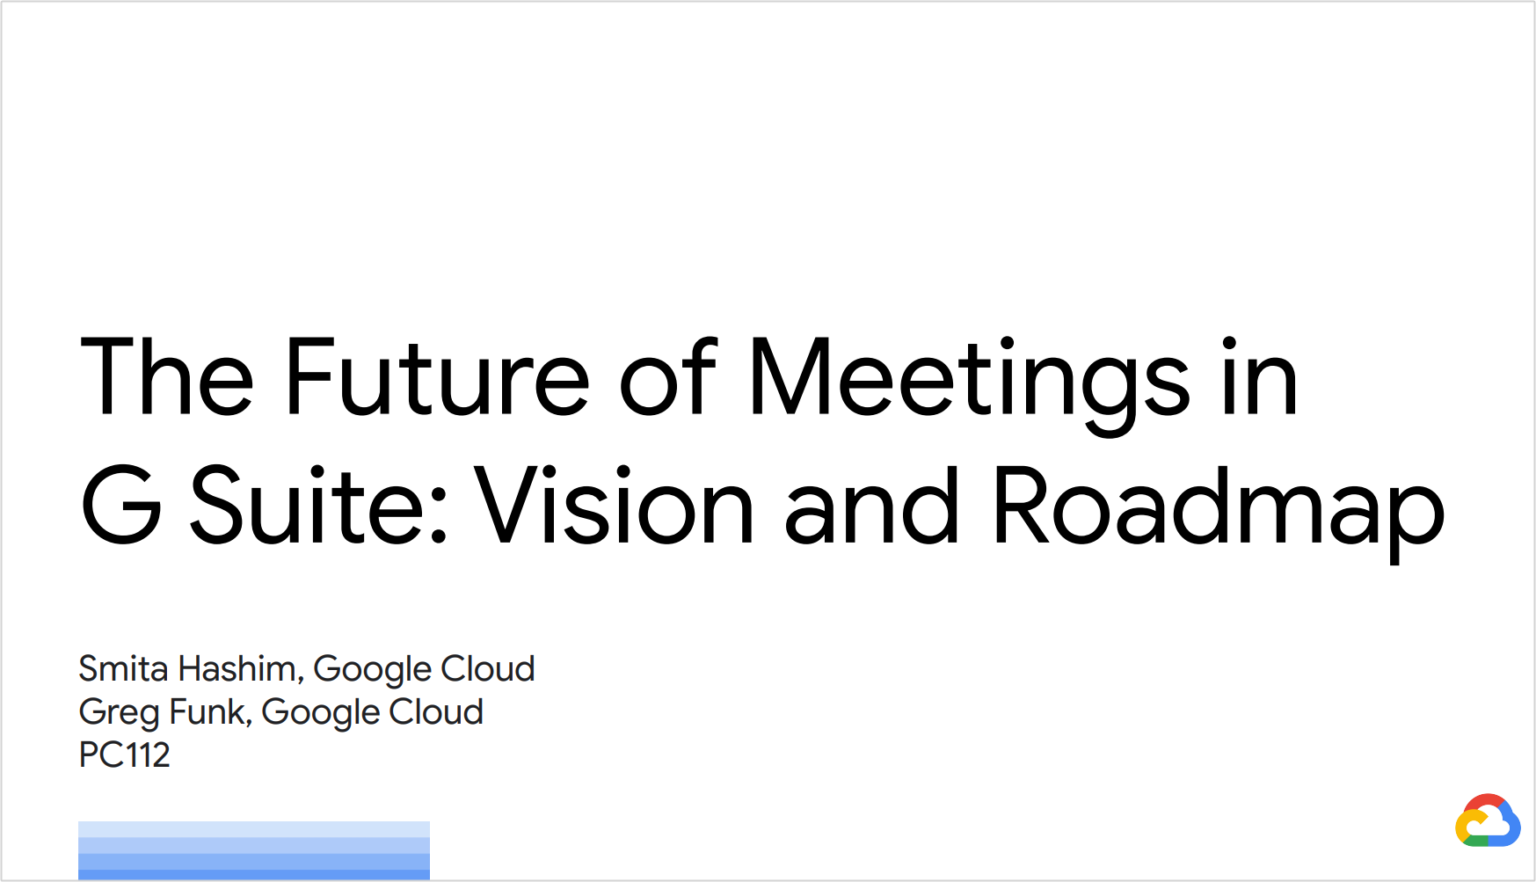 The Future of Meetings in G Suite: Vision and Roadmap